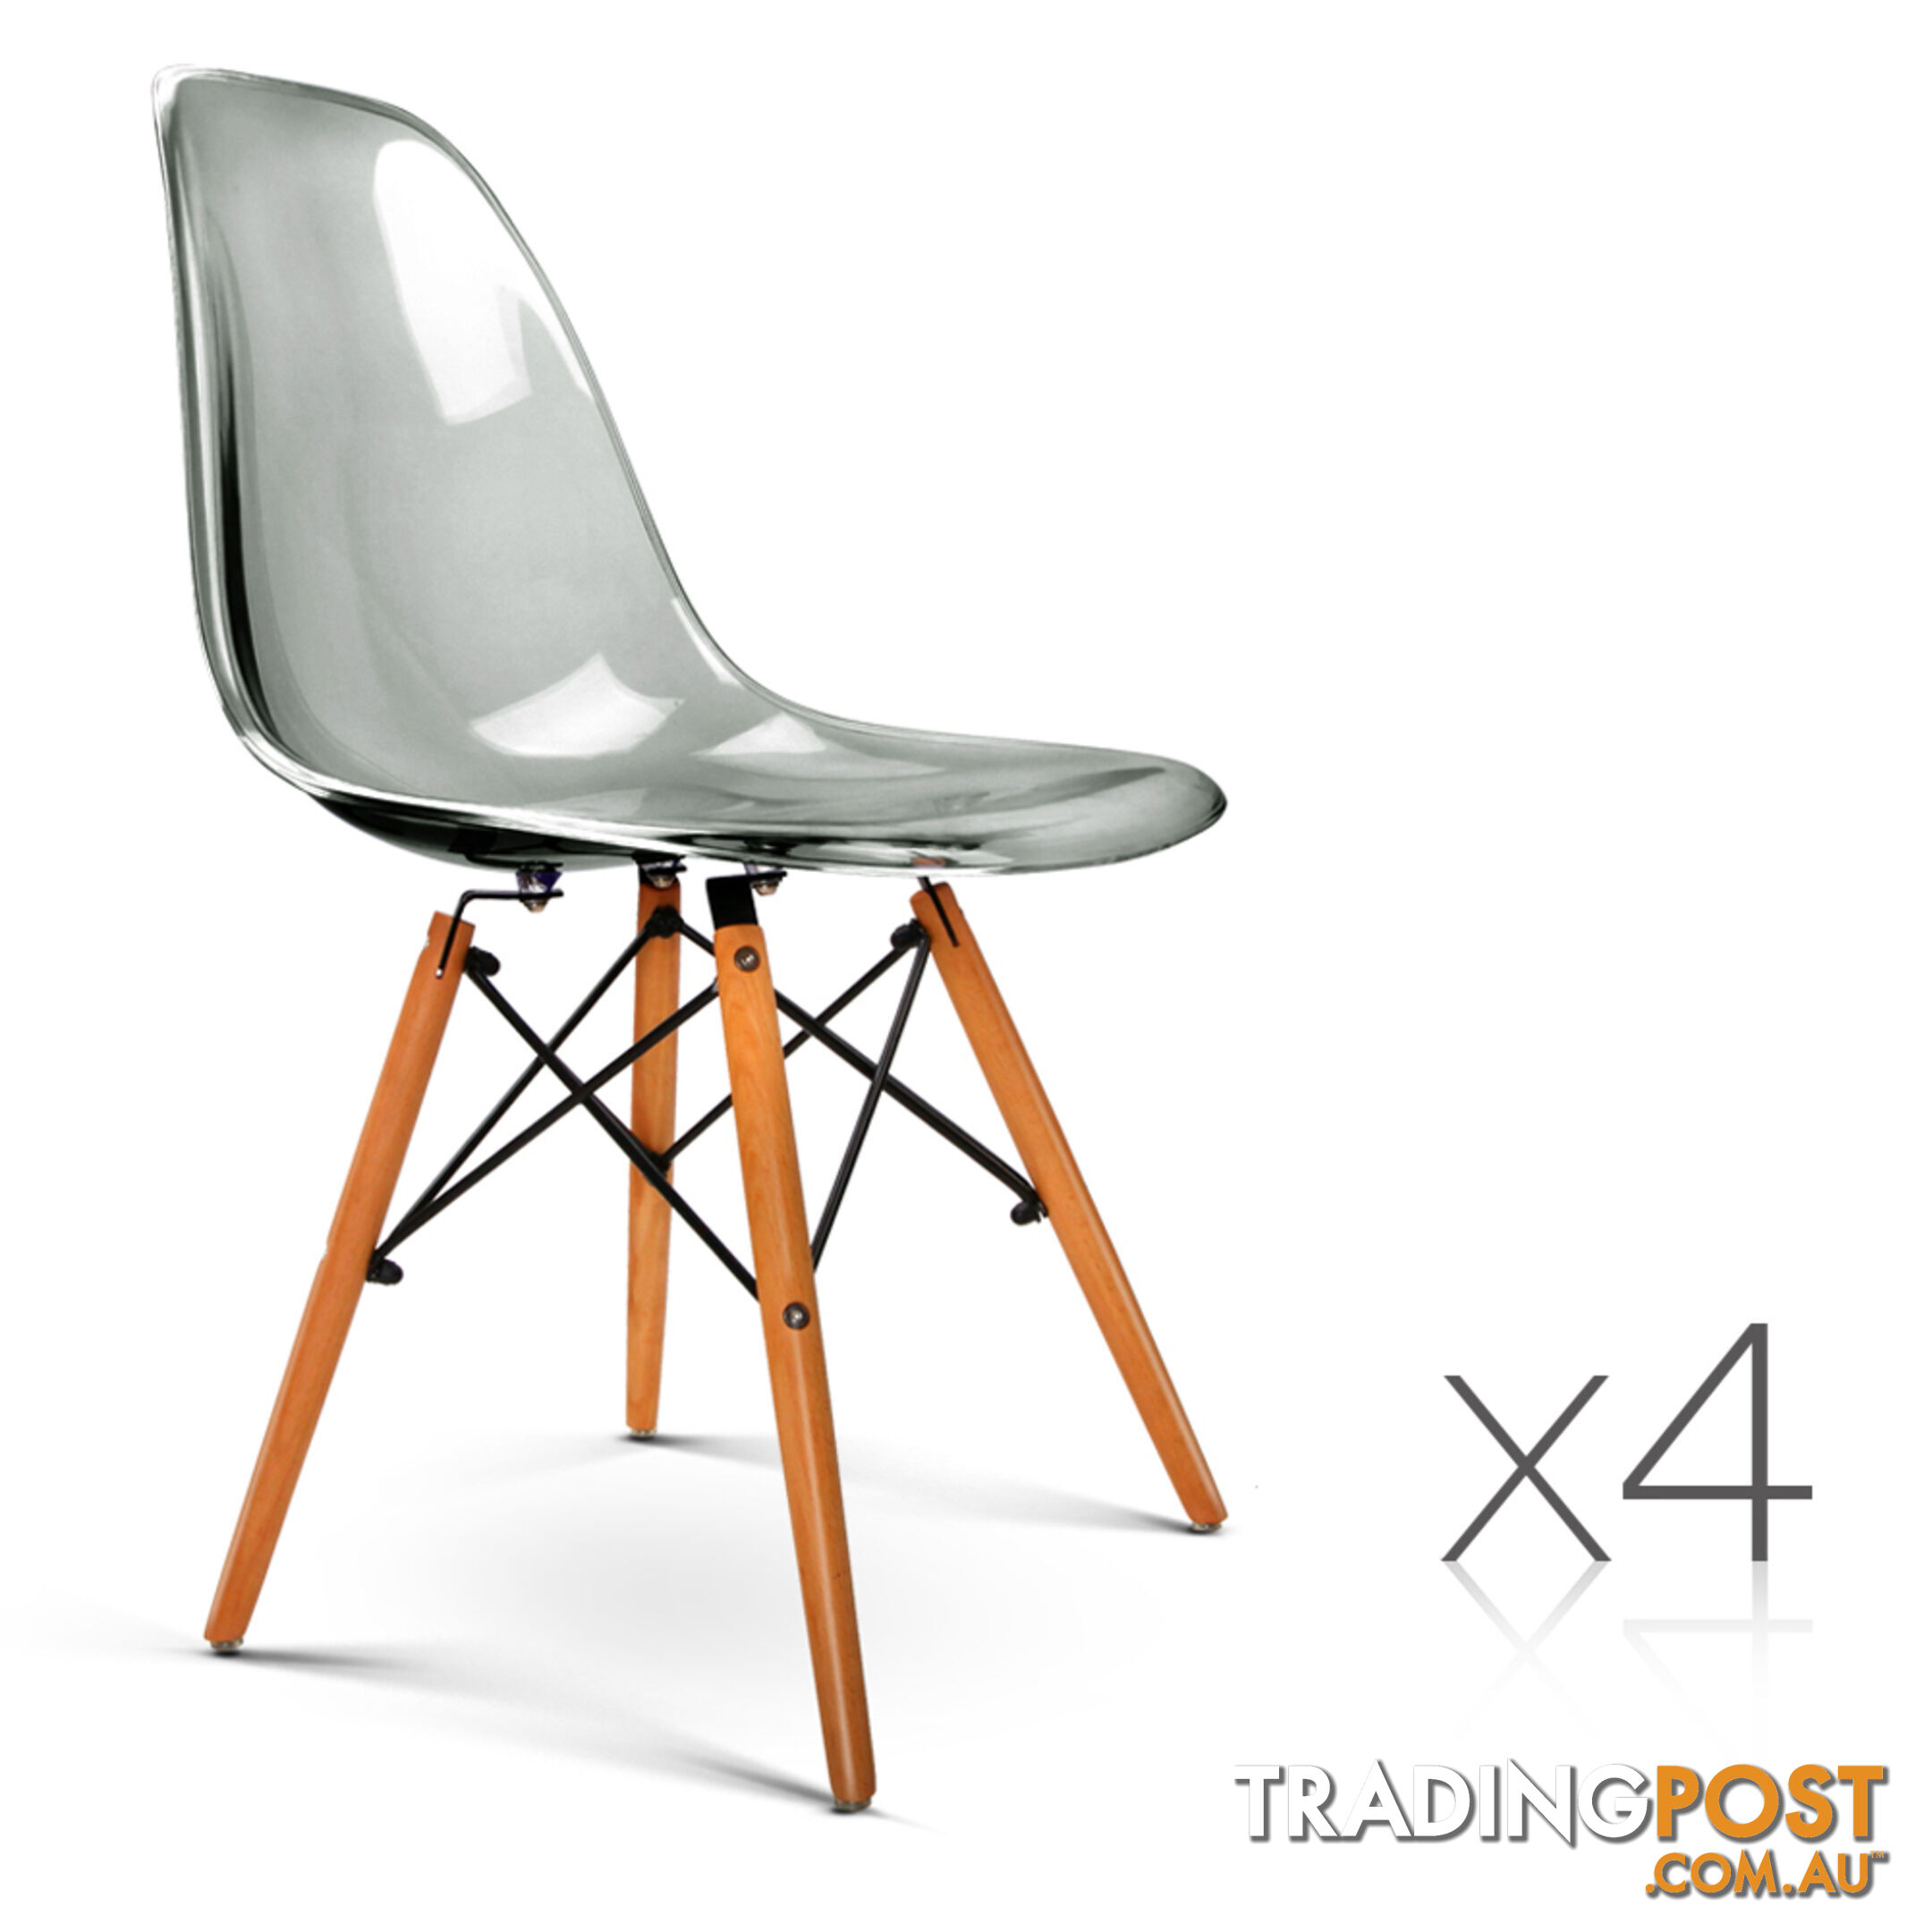 Set of 4 Replica Eames Dining Chairs - Transparent Grey